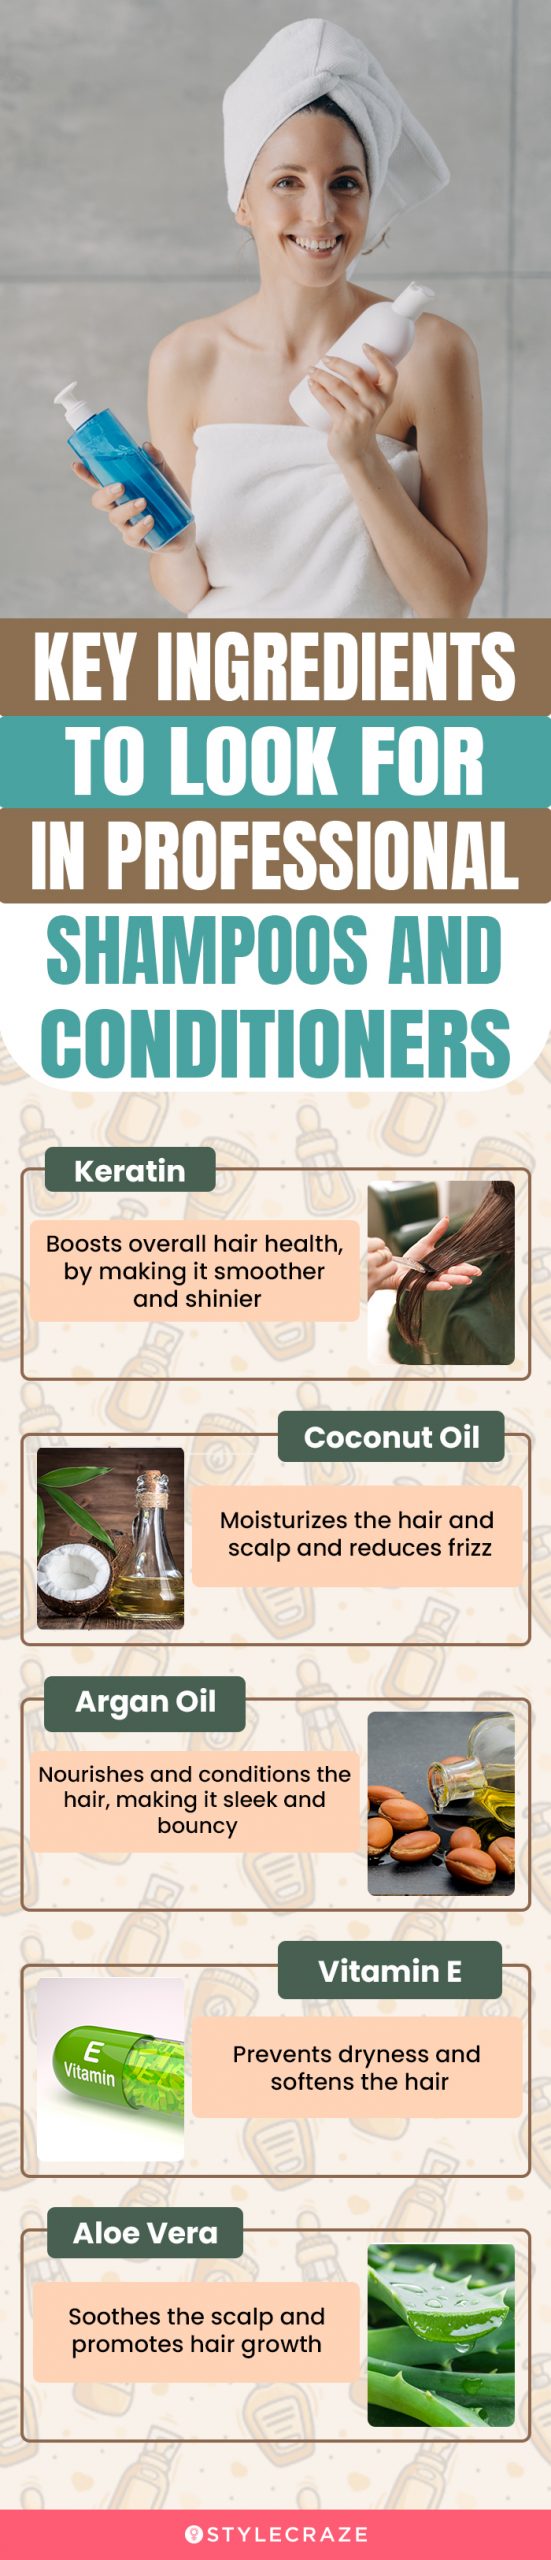 Key Ingredients To Look For In Professional Shampoos And Conditioners (infographic)